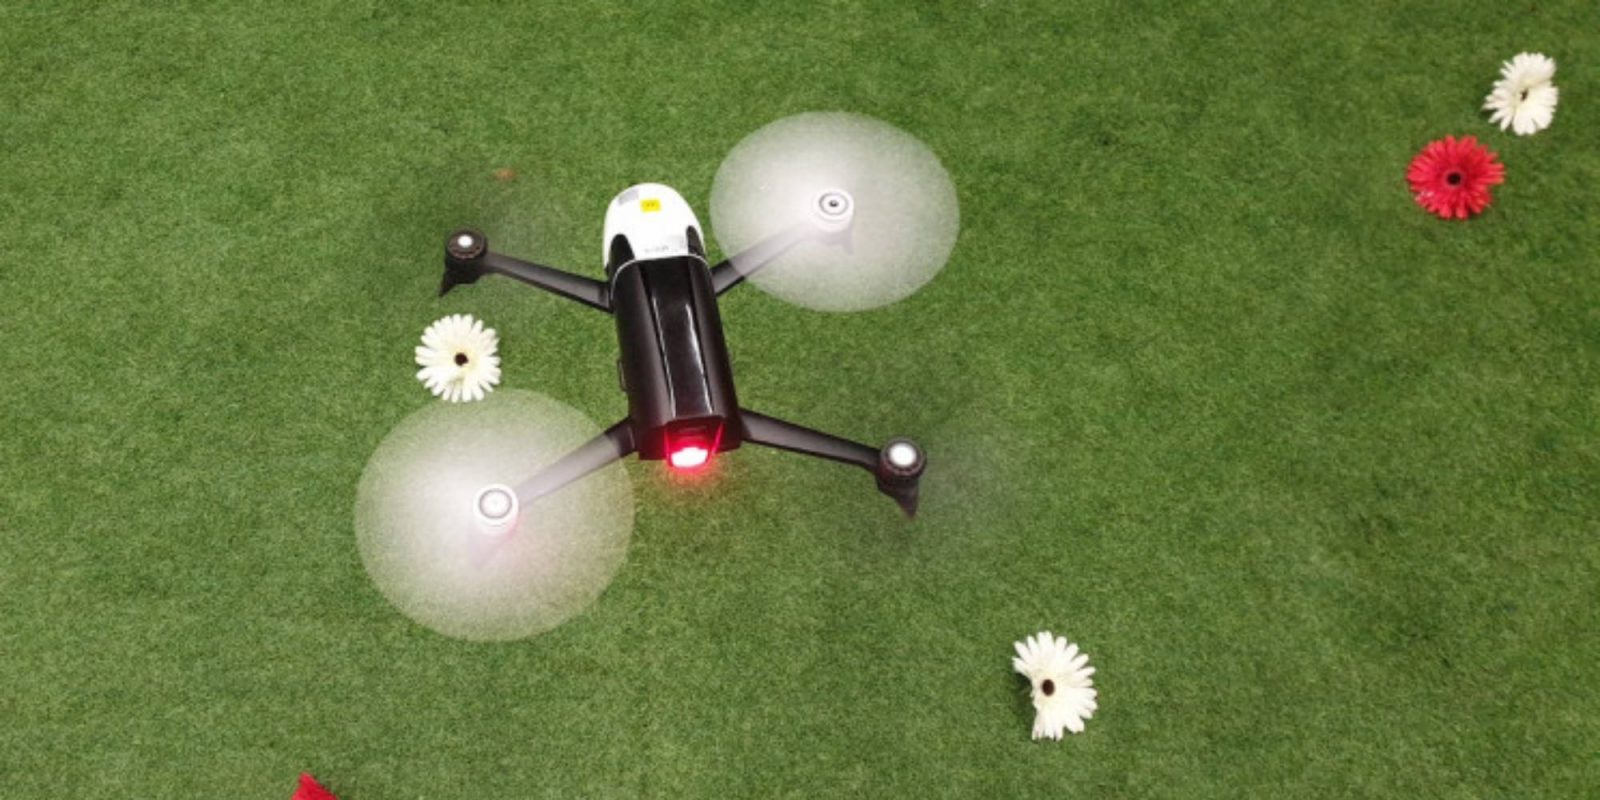 drone insects flight tasks